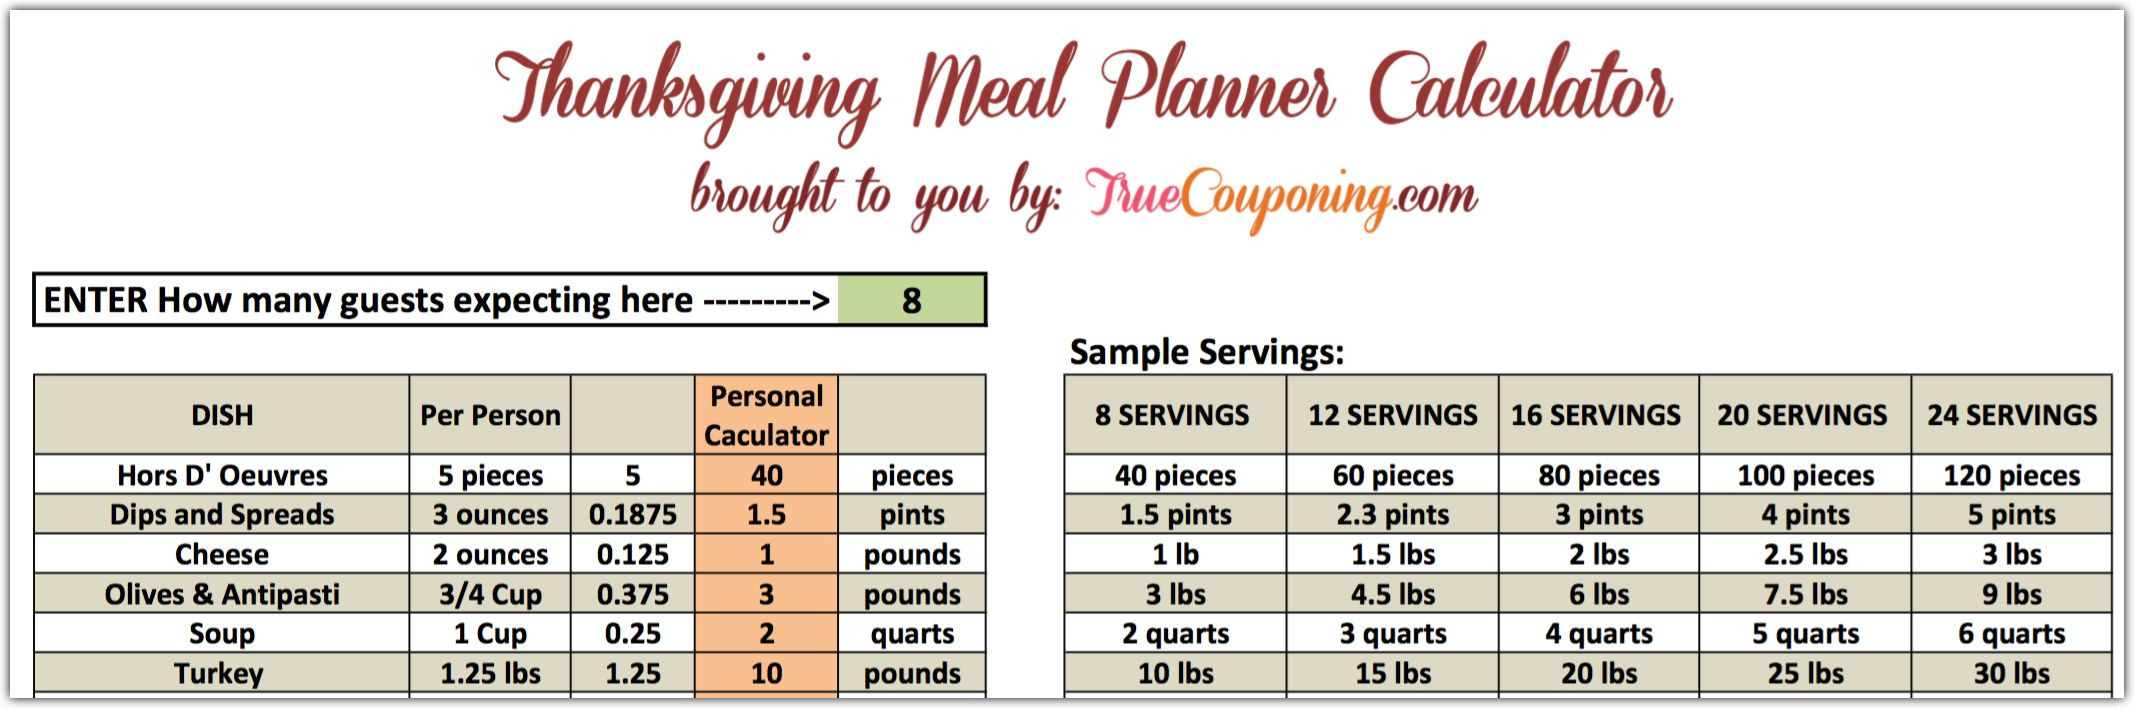 Thanksgiving Food Calculator
 FREE Download Thanksgiving Meal Planner Calculator